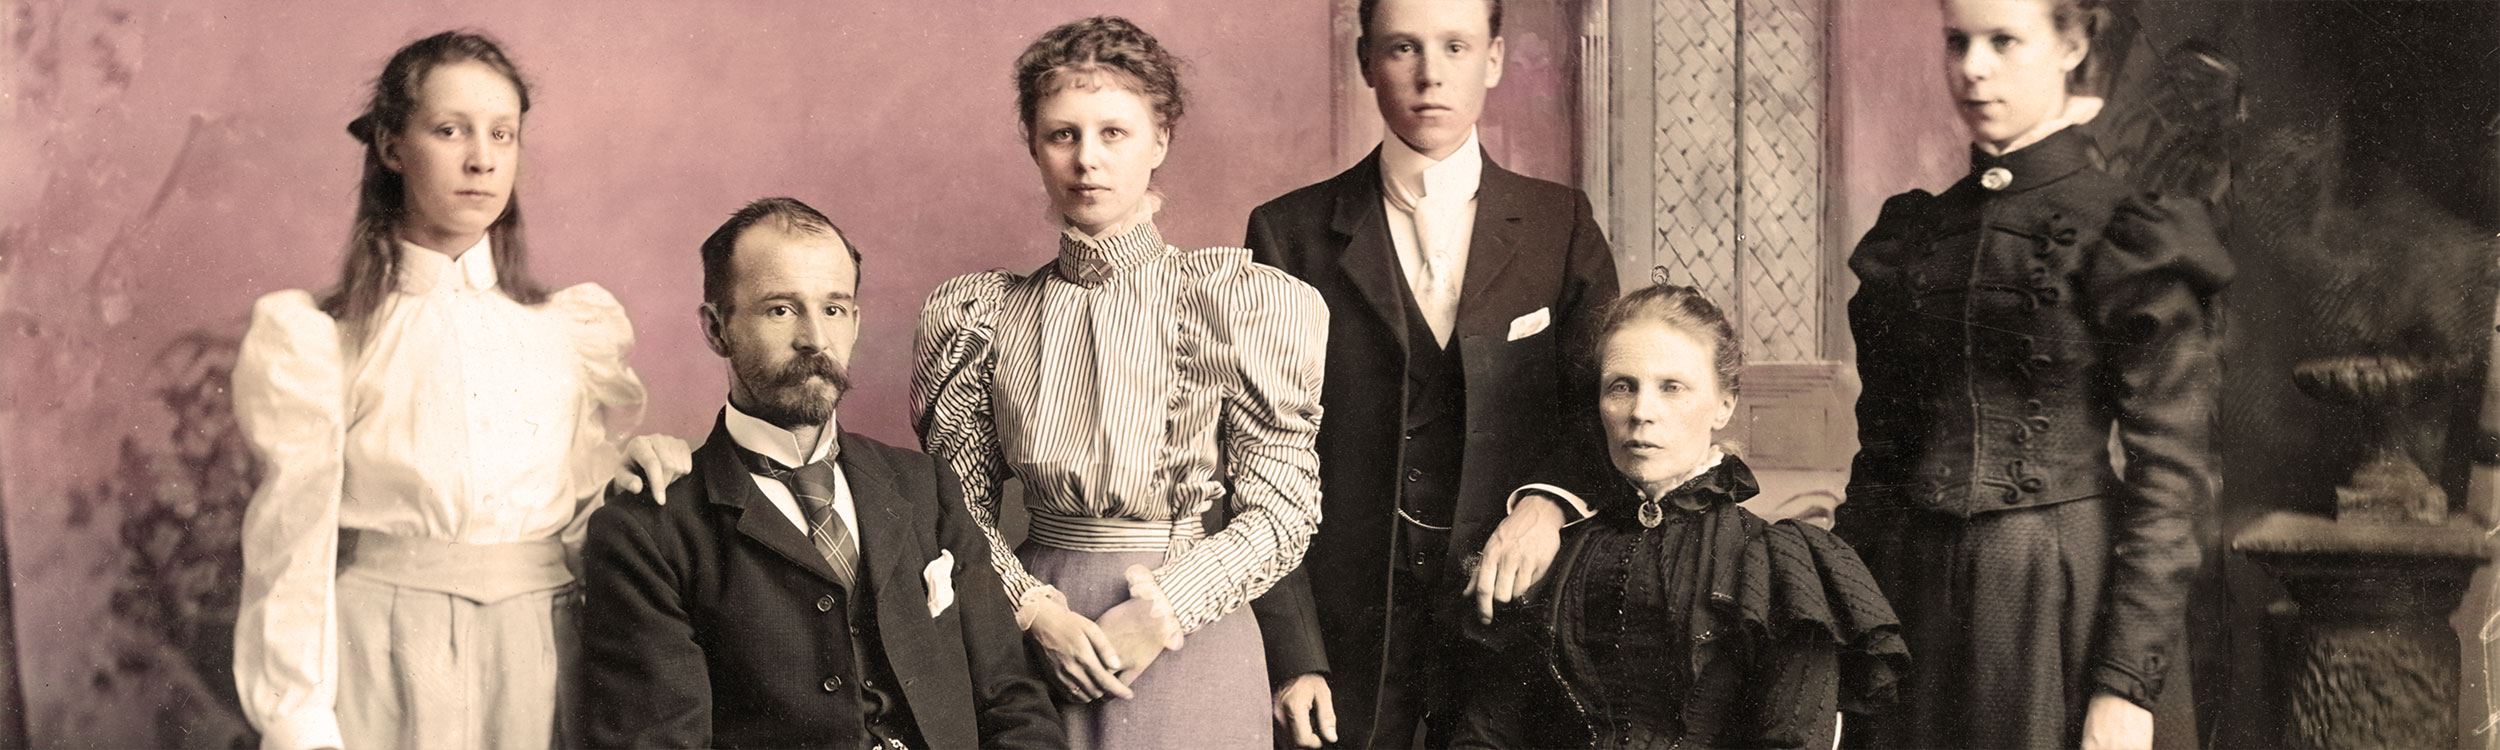 Family Group of 6 C1900